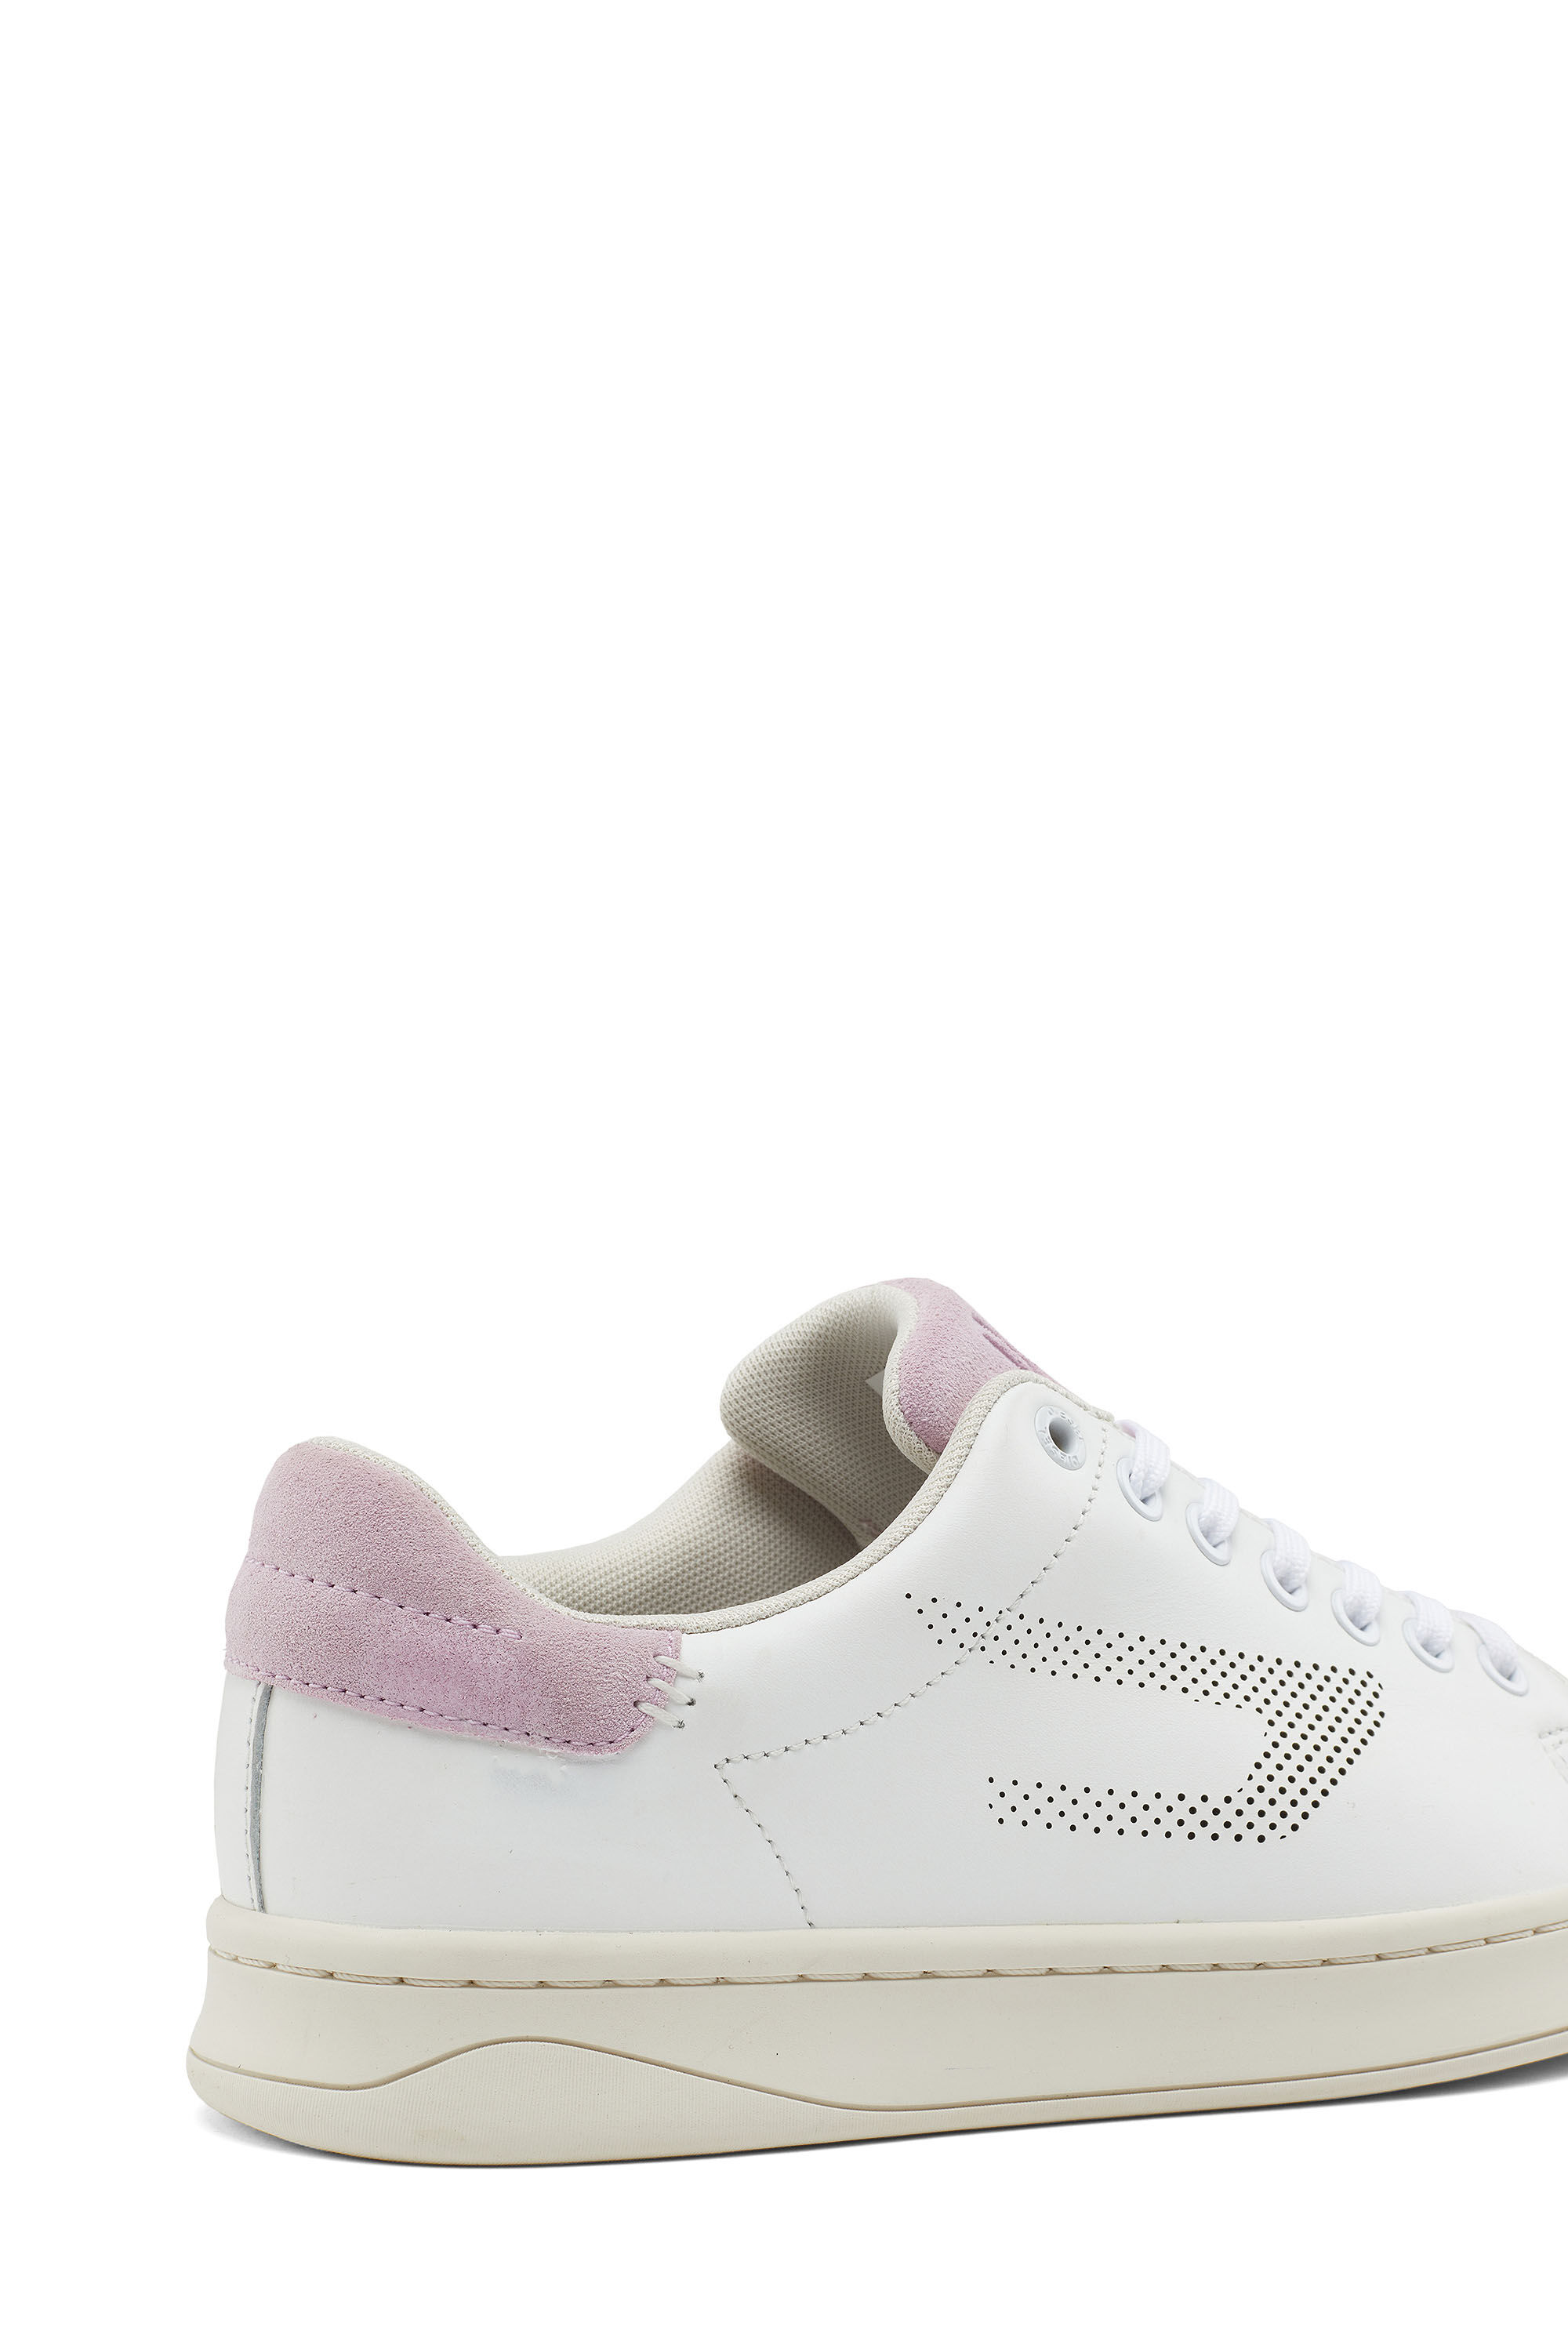 Diesel - S-ATHENE LOW W, Rosa/Weiss - Image 7